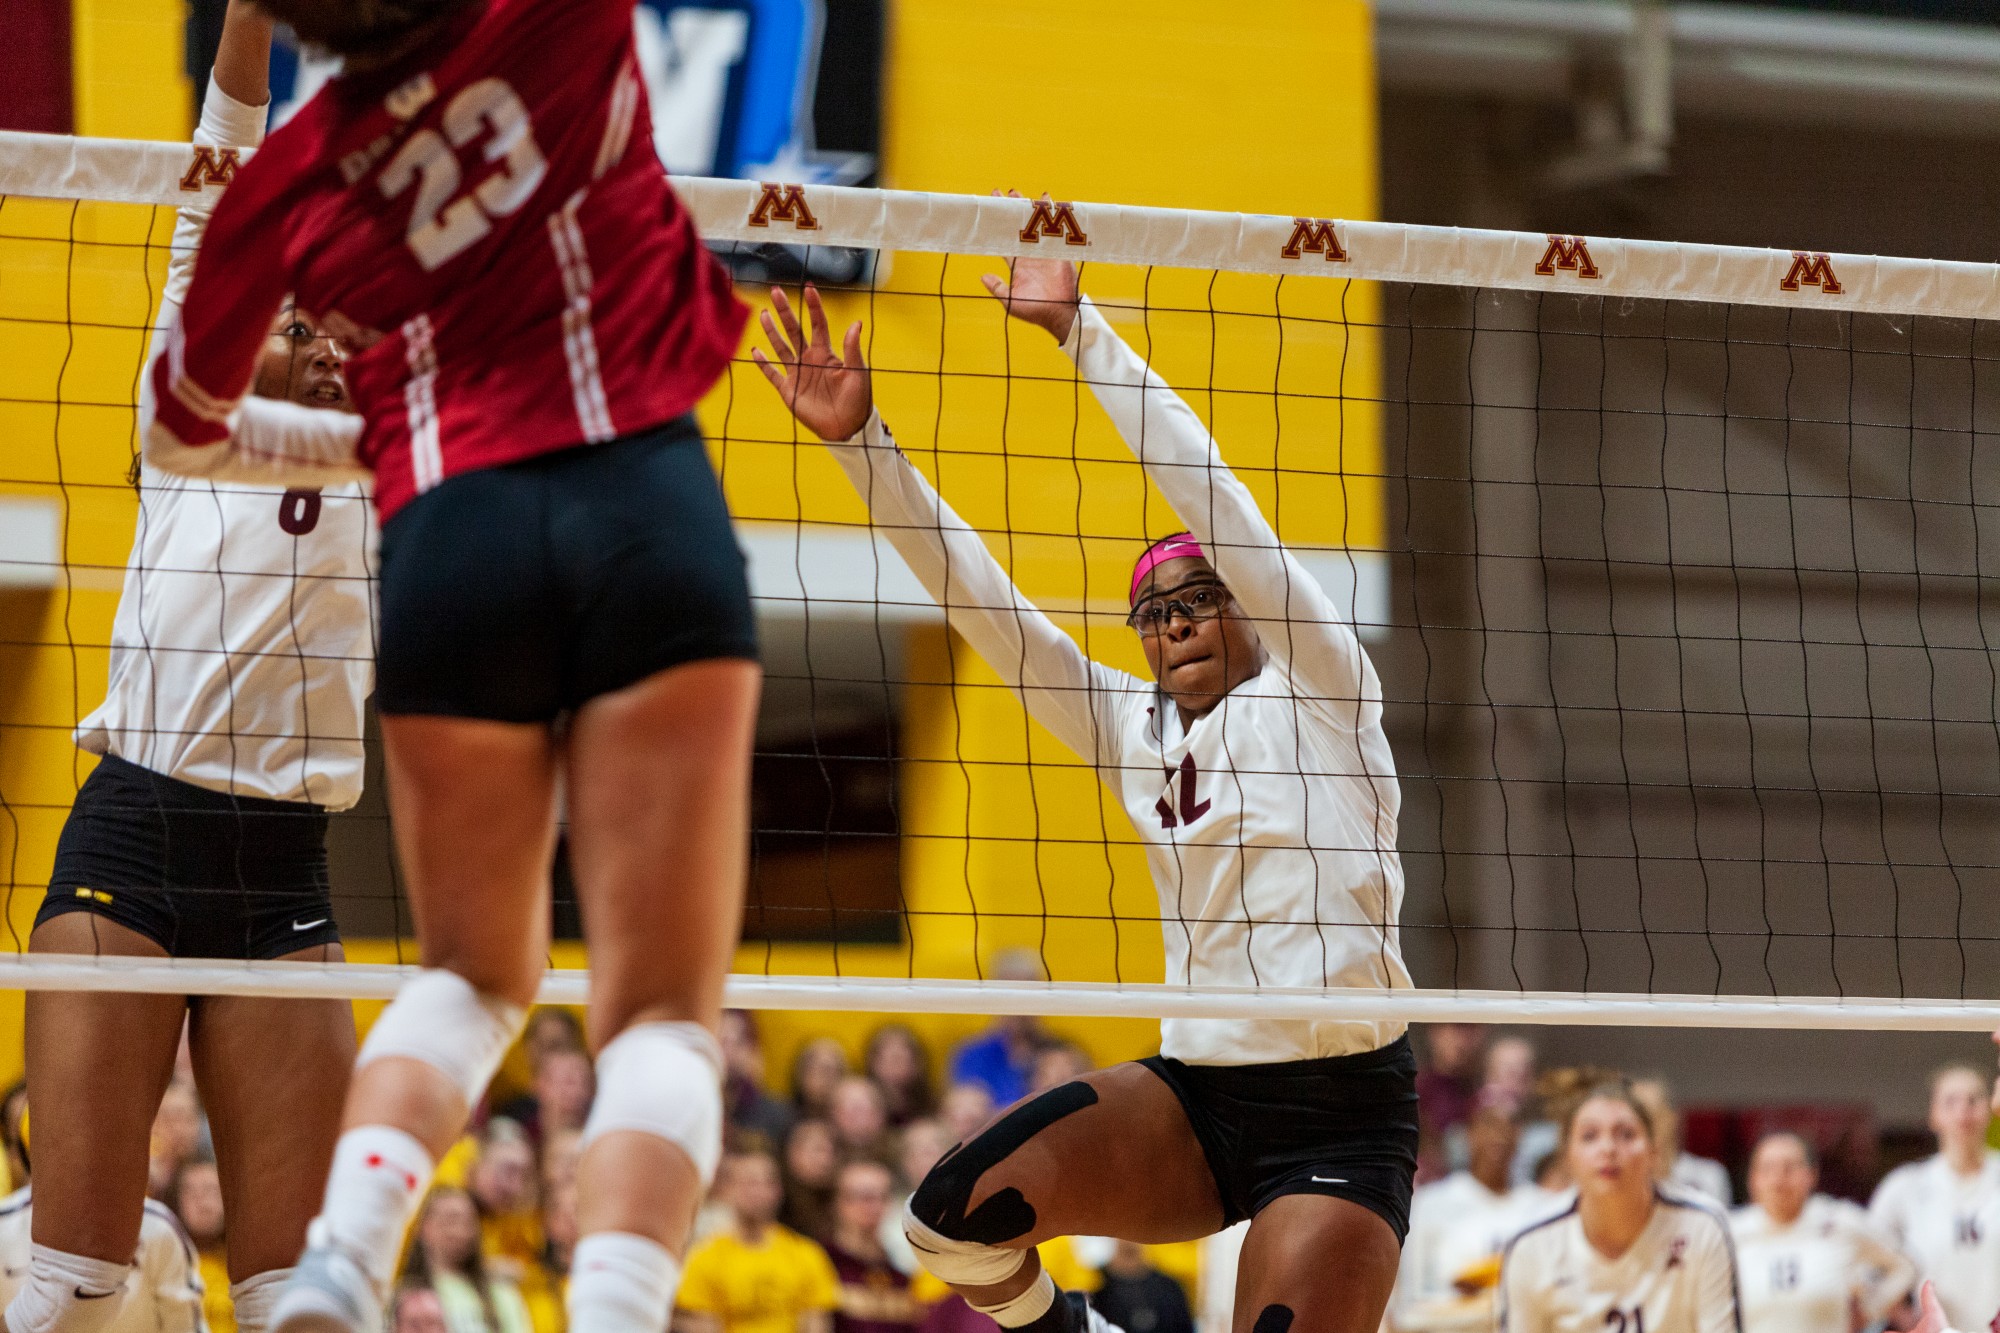 Middle Blocker Taylor Morgan looks to block a pass at the Maturi Pavilion on Thursday, Nov. 14. The Gophers ended the night with a 3-1 loss against the Badgers. 